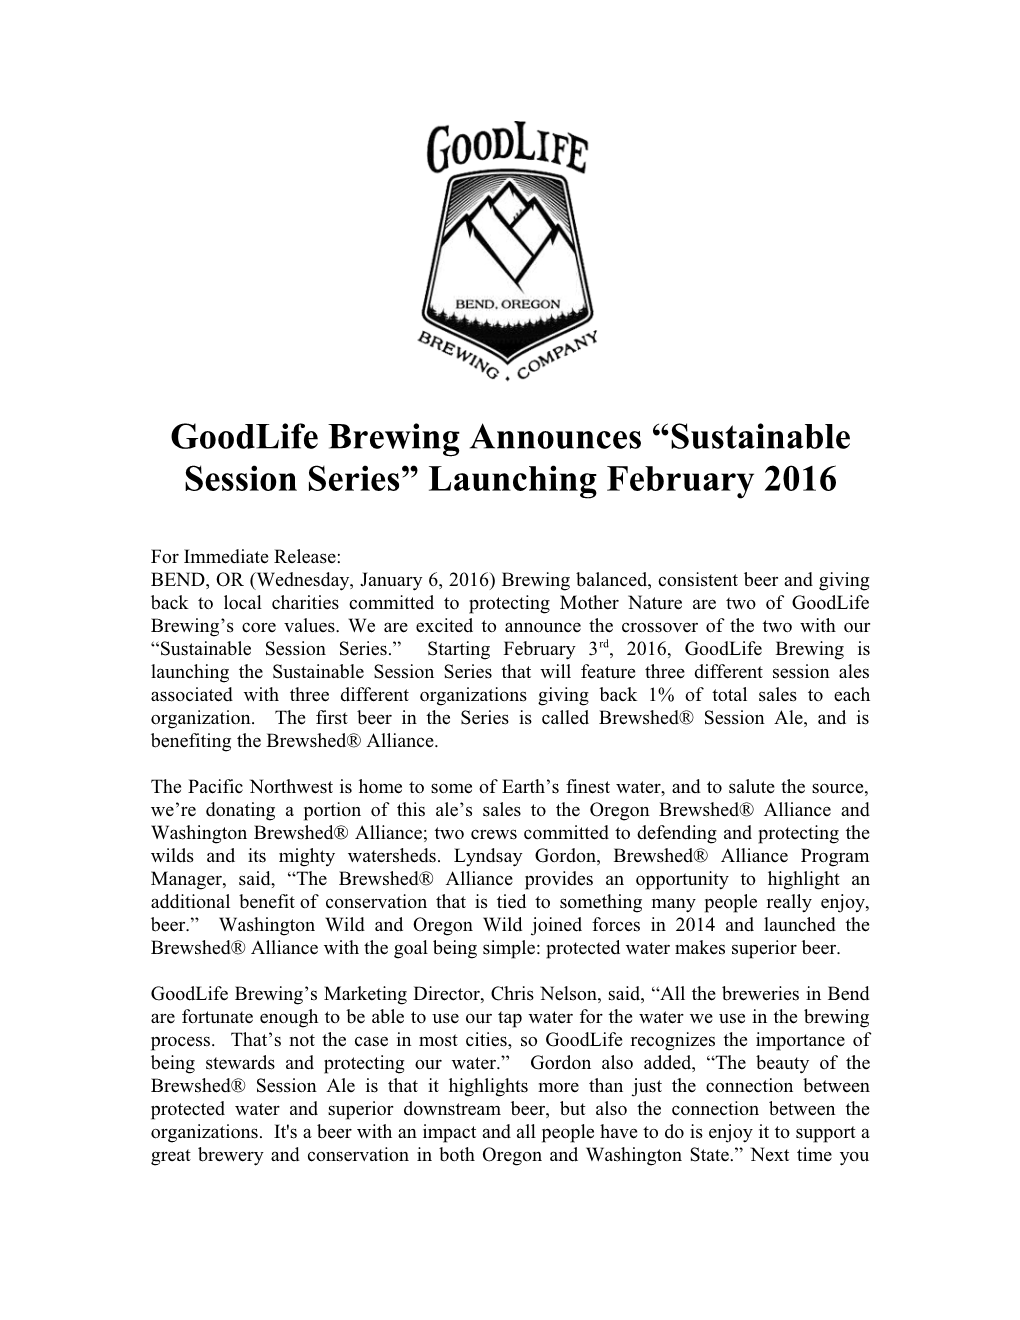 Goodlife Brewing Announces Sustainable Session Series Launching February 2016